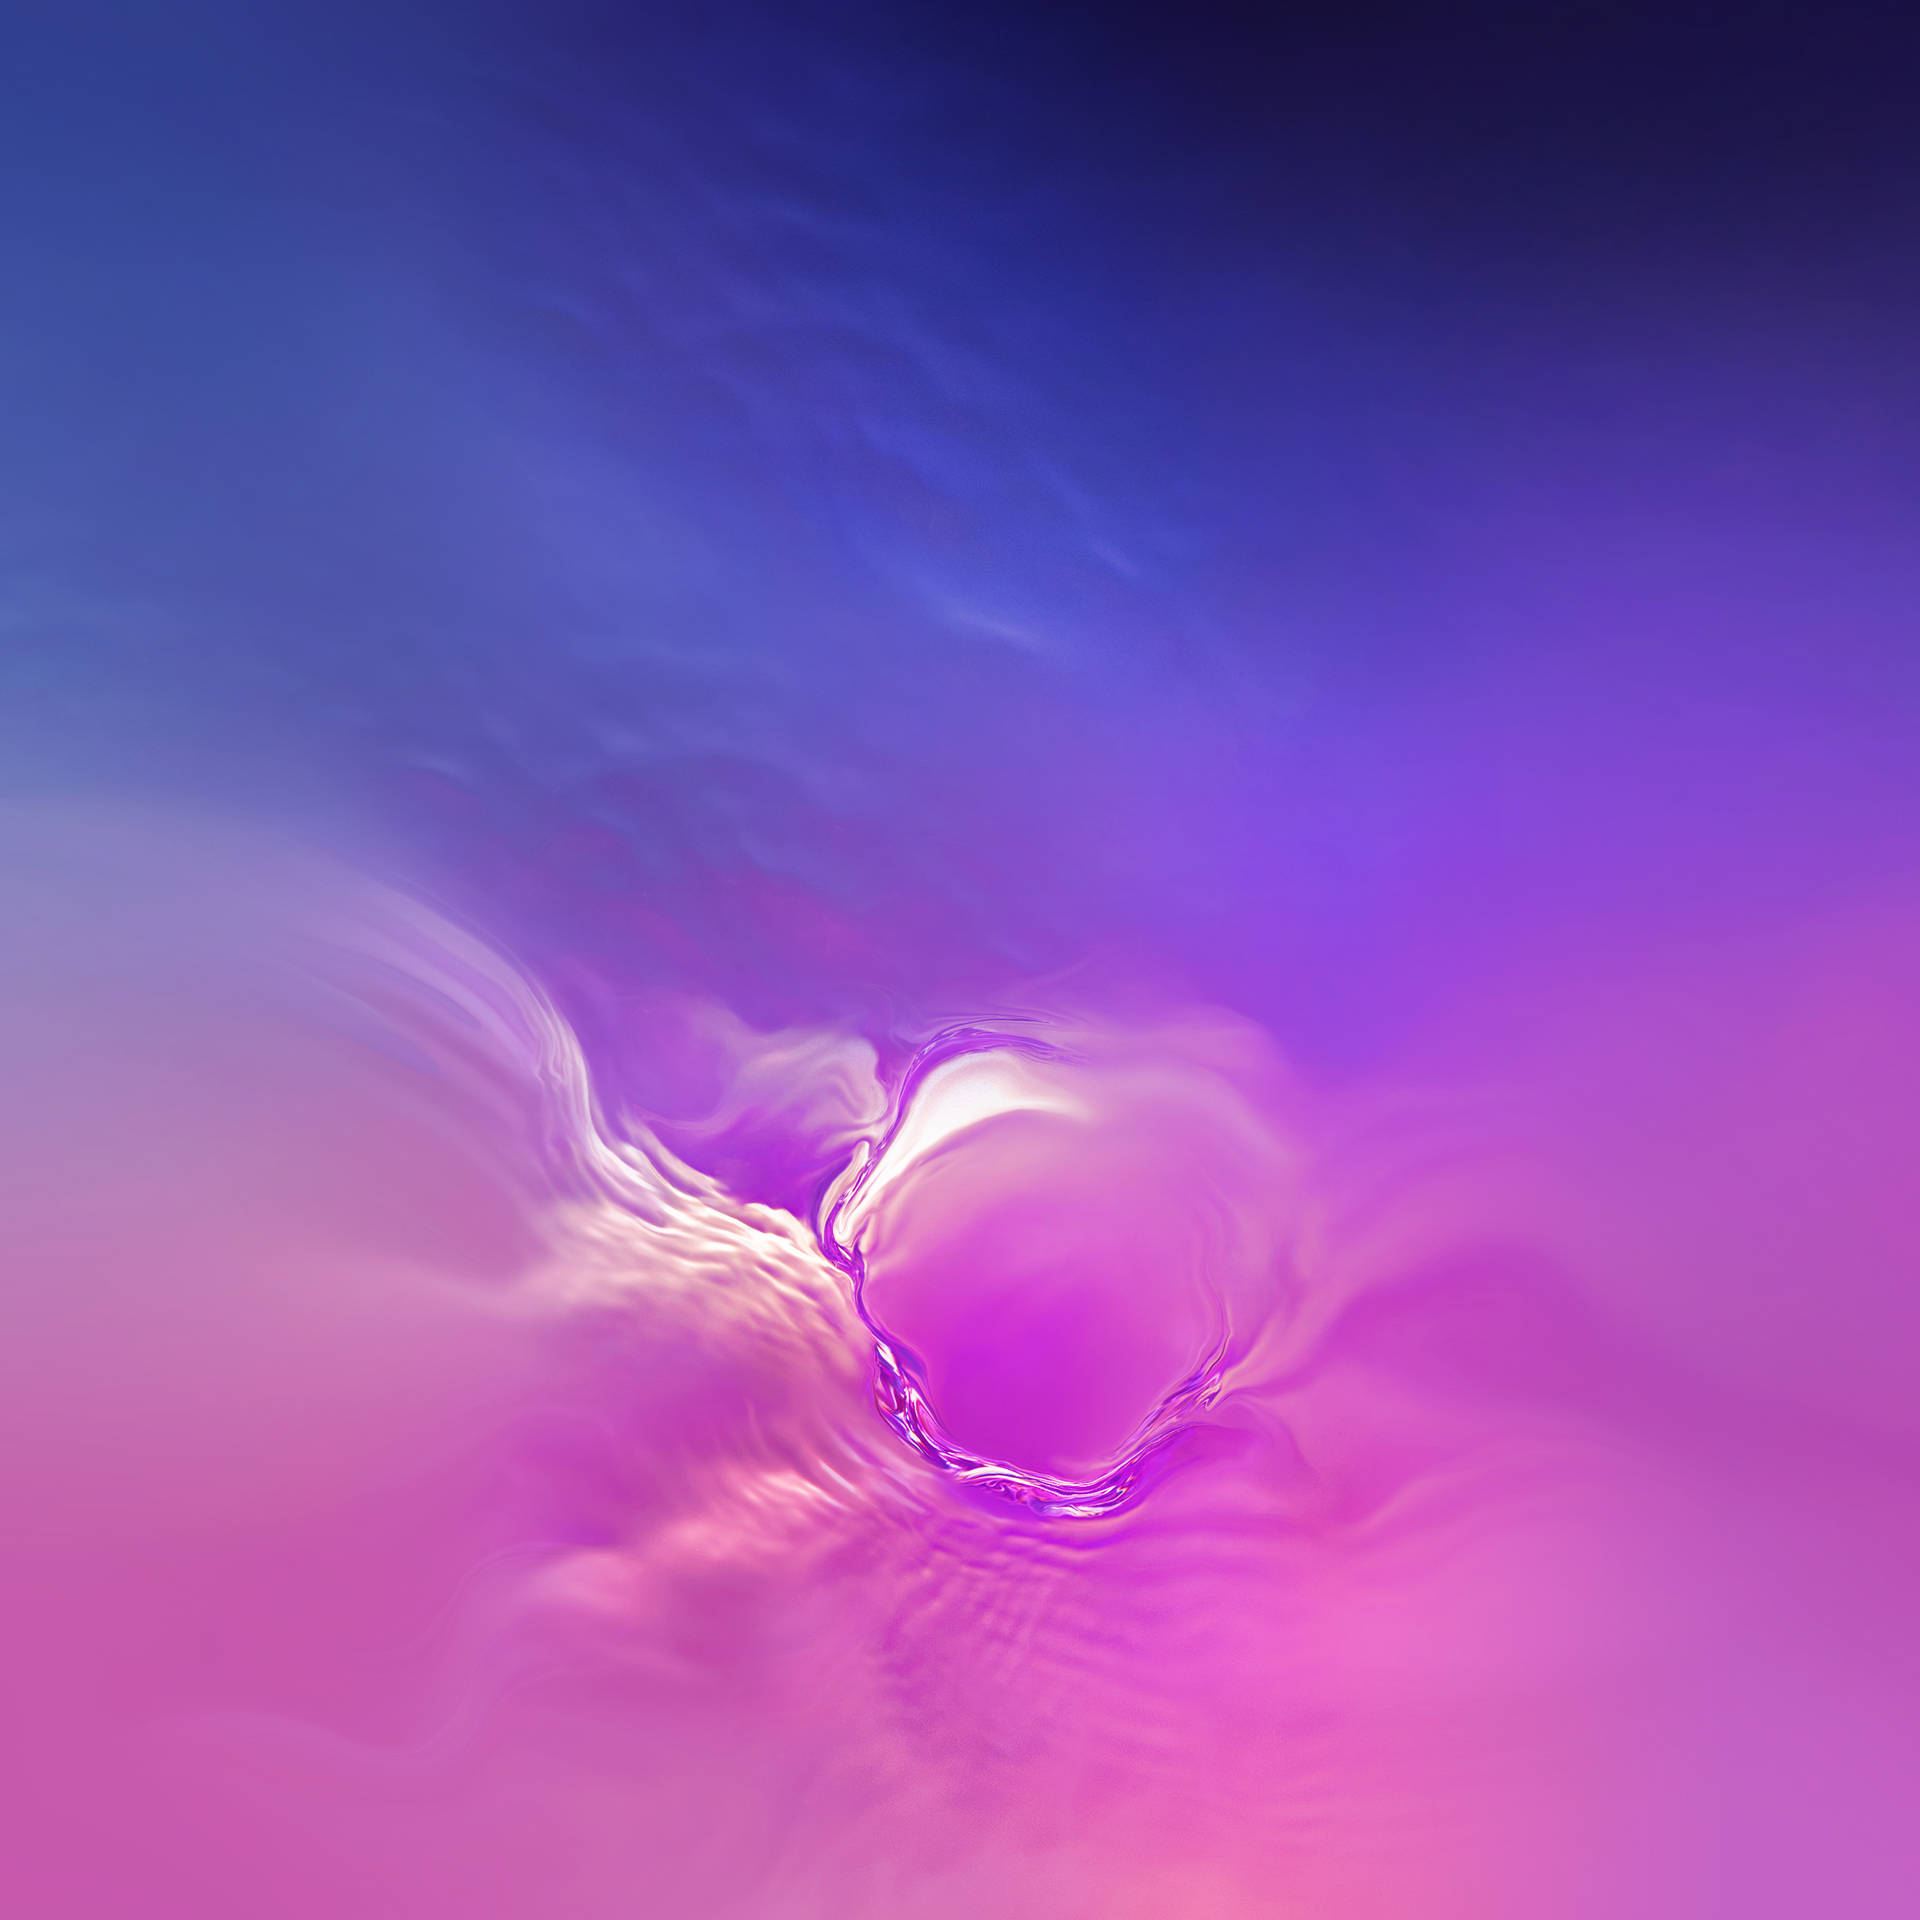 Galaxy S10 Blue Over Pink Wallpaper